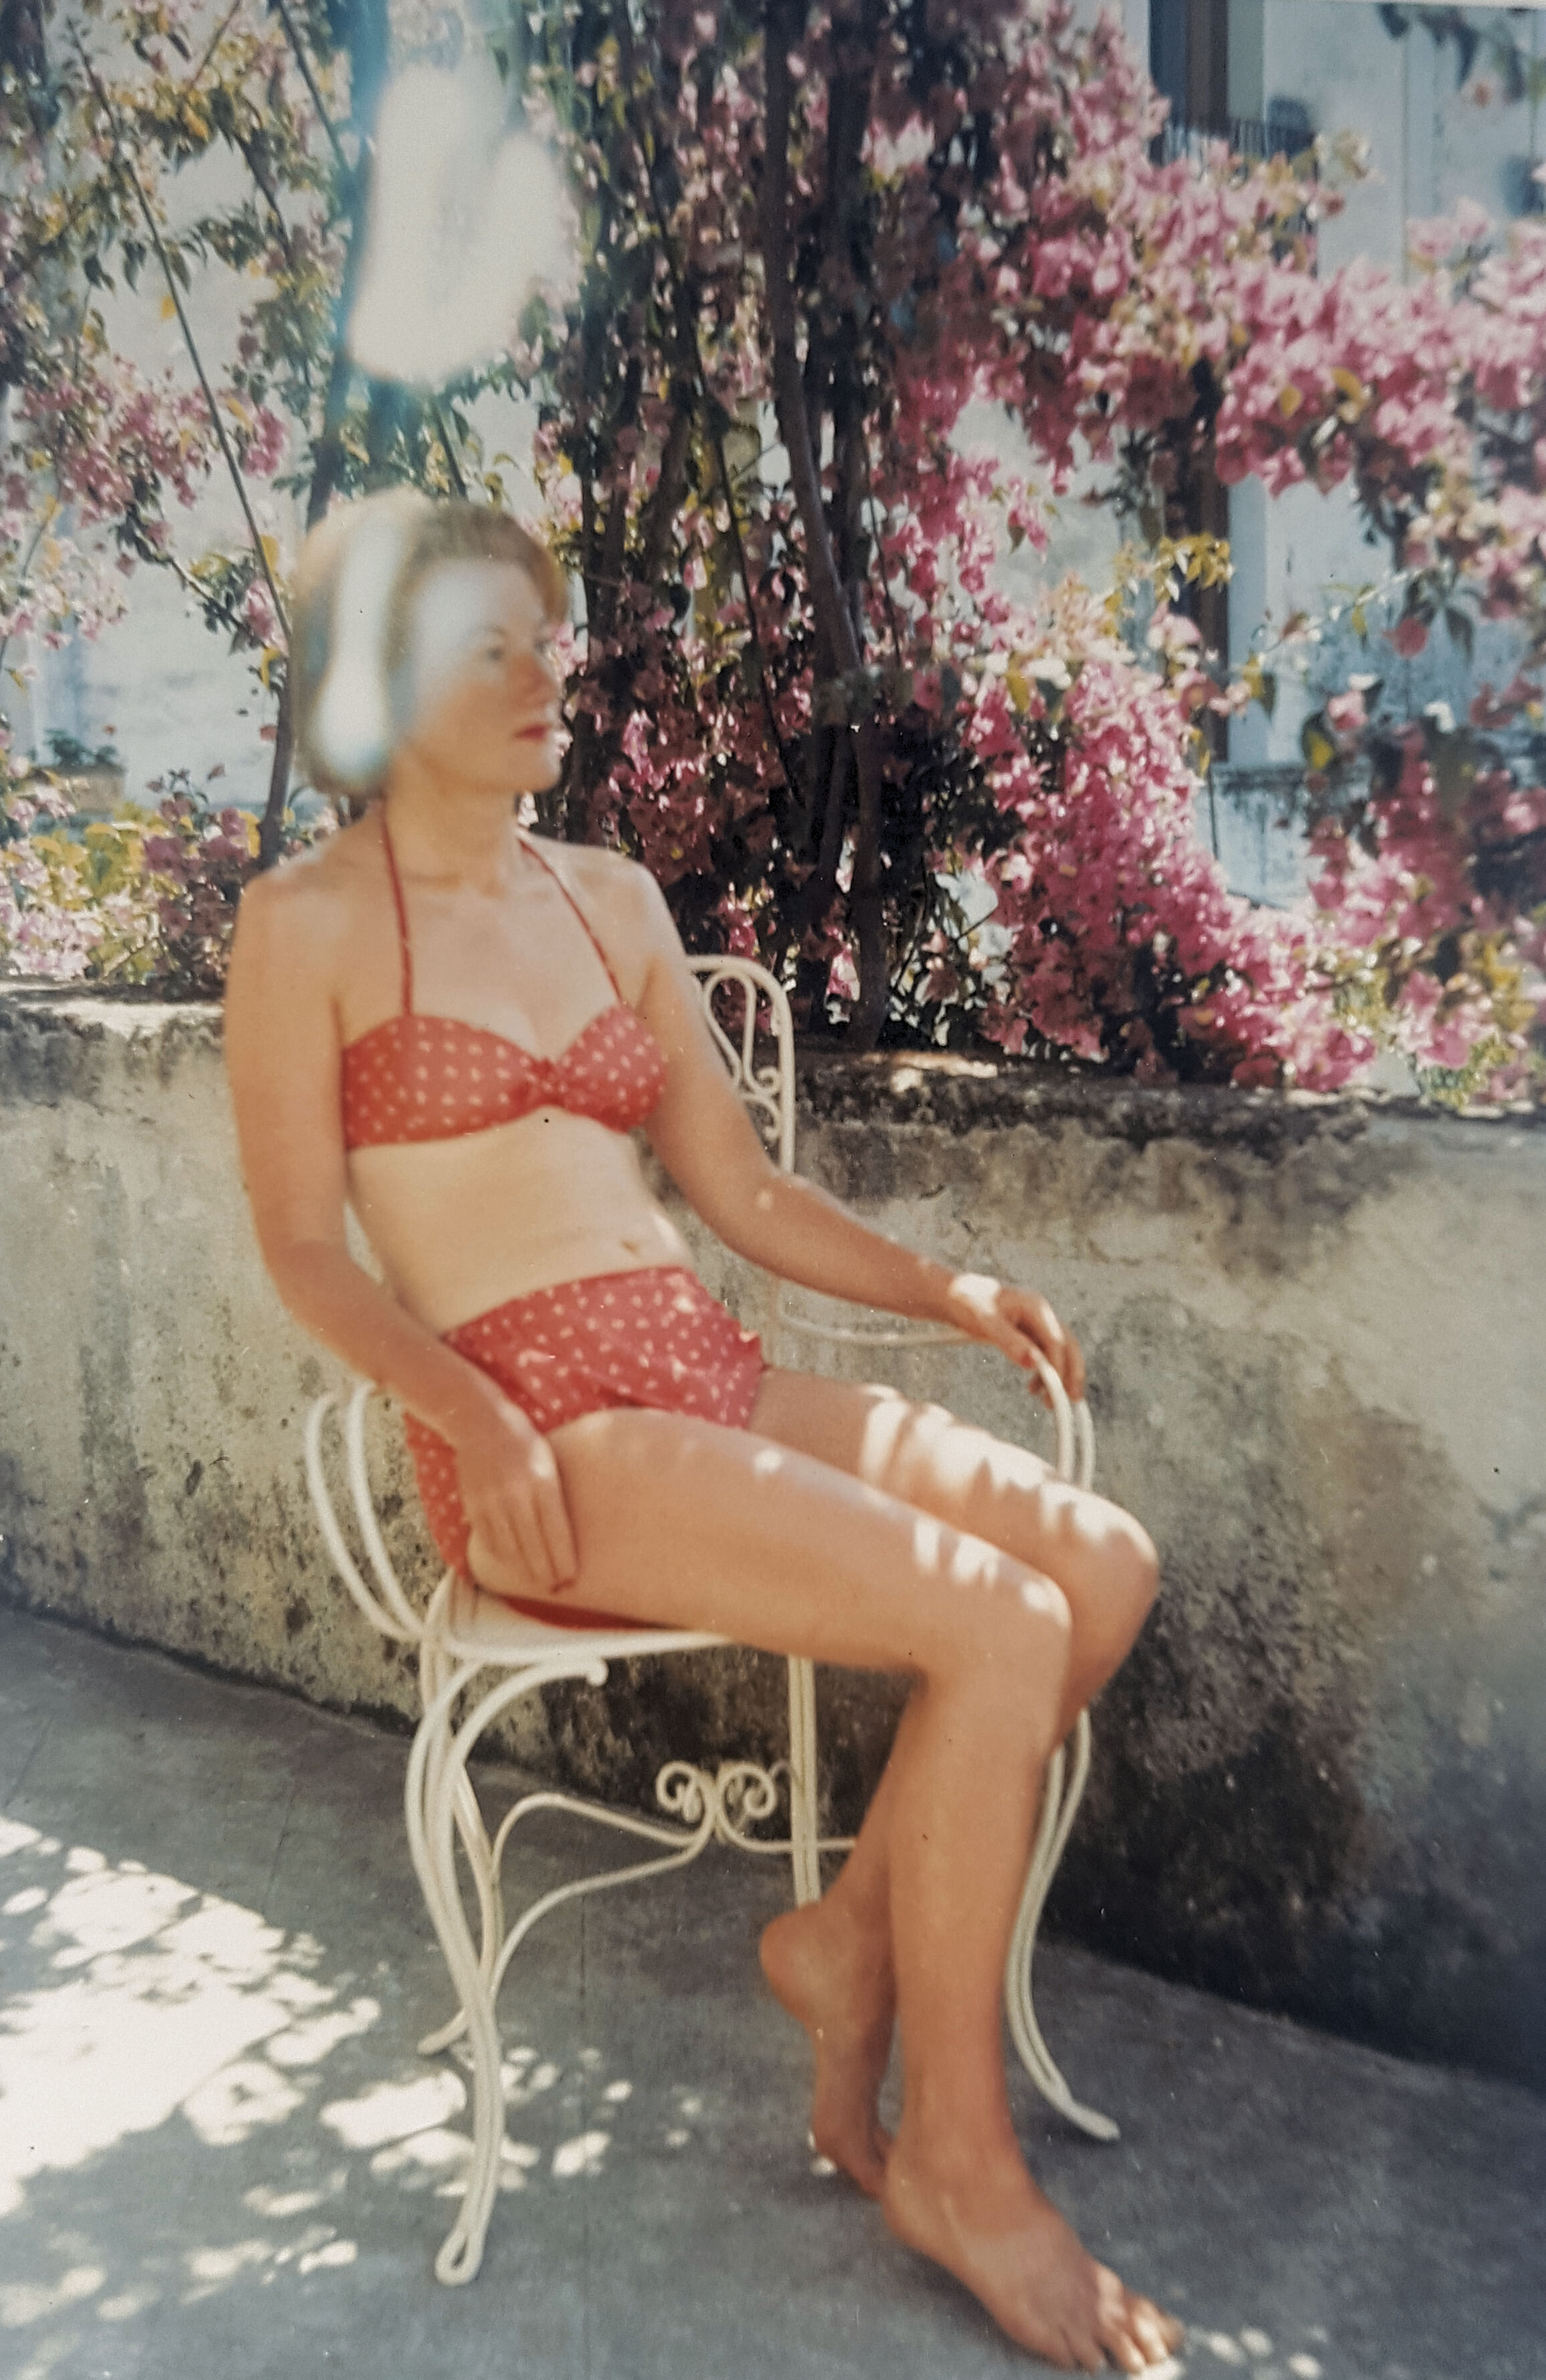 I think this picture was taken in Positano Italy roundabout 1960